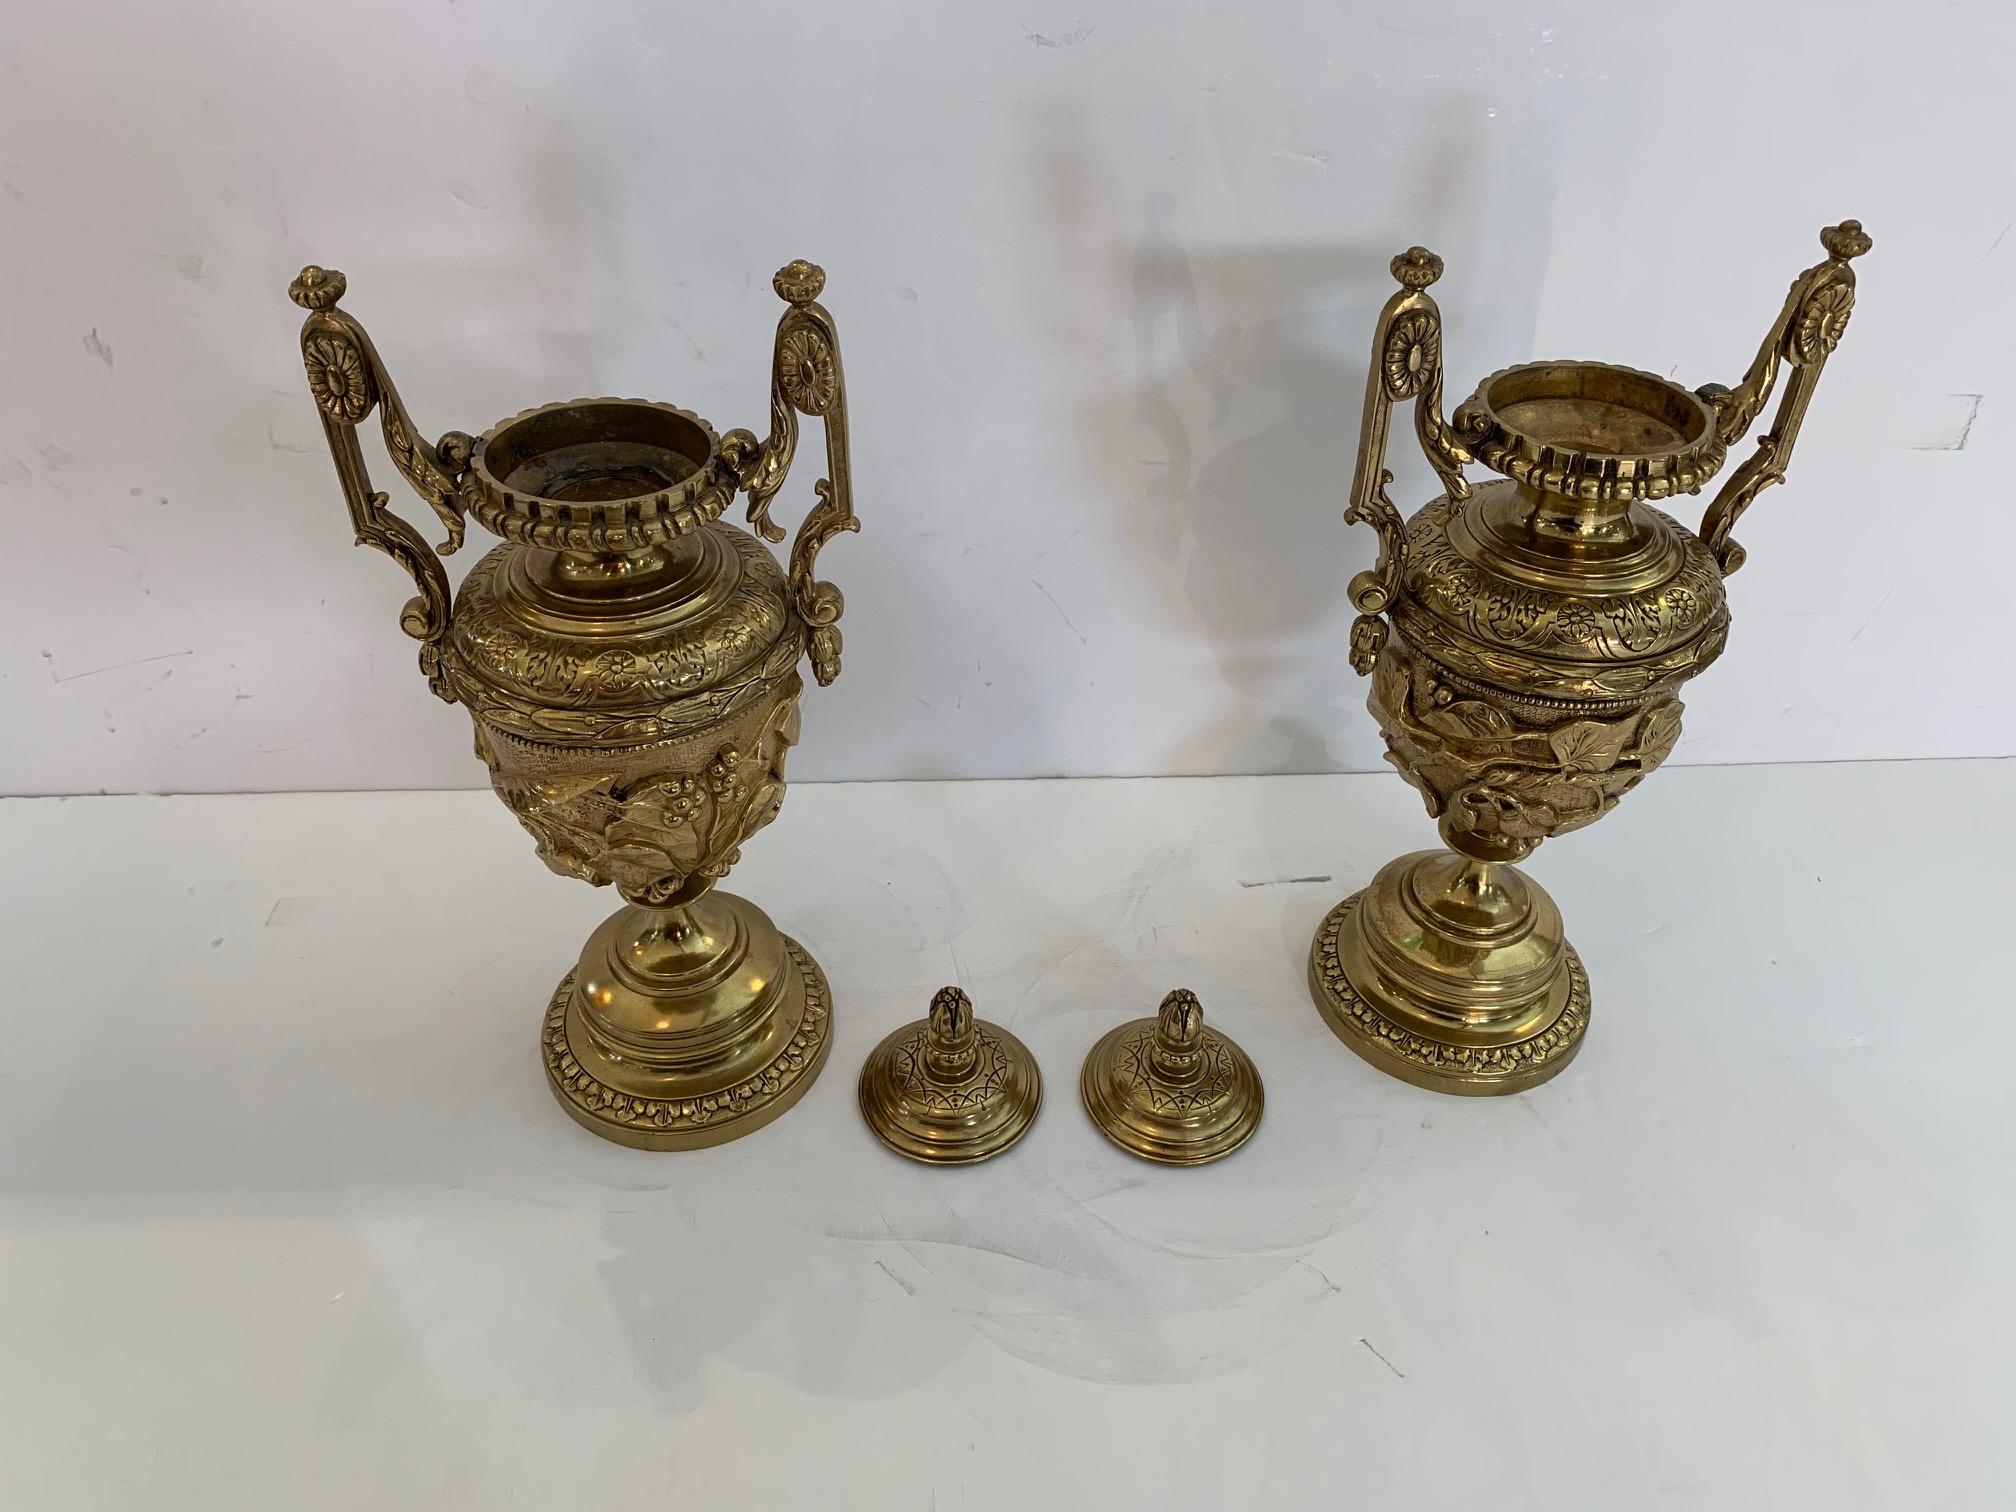 Gorgeous Ornate Pair of Revival Style Cast Brass Relief Lidded Urns For Sale 5